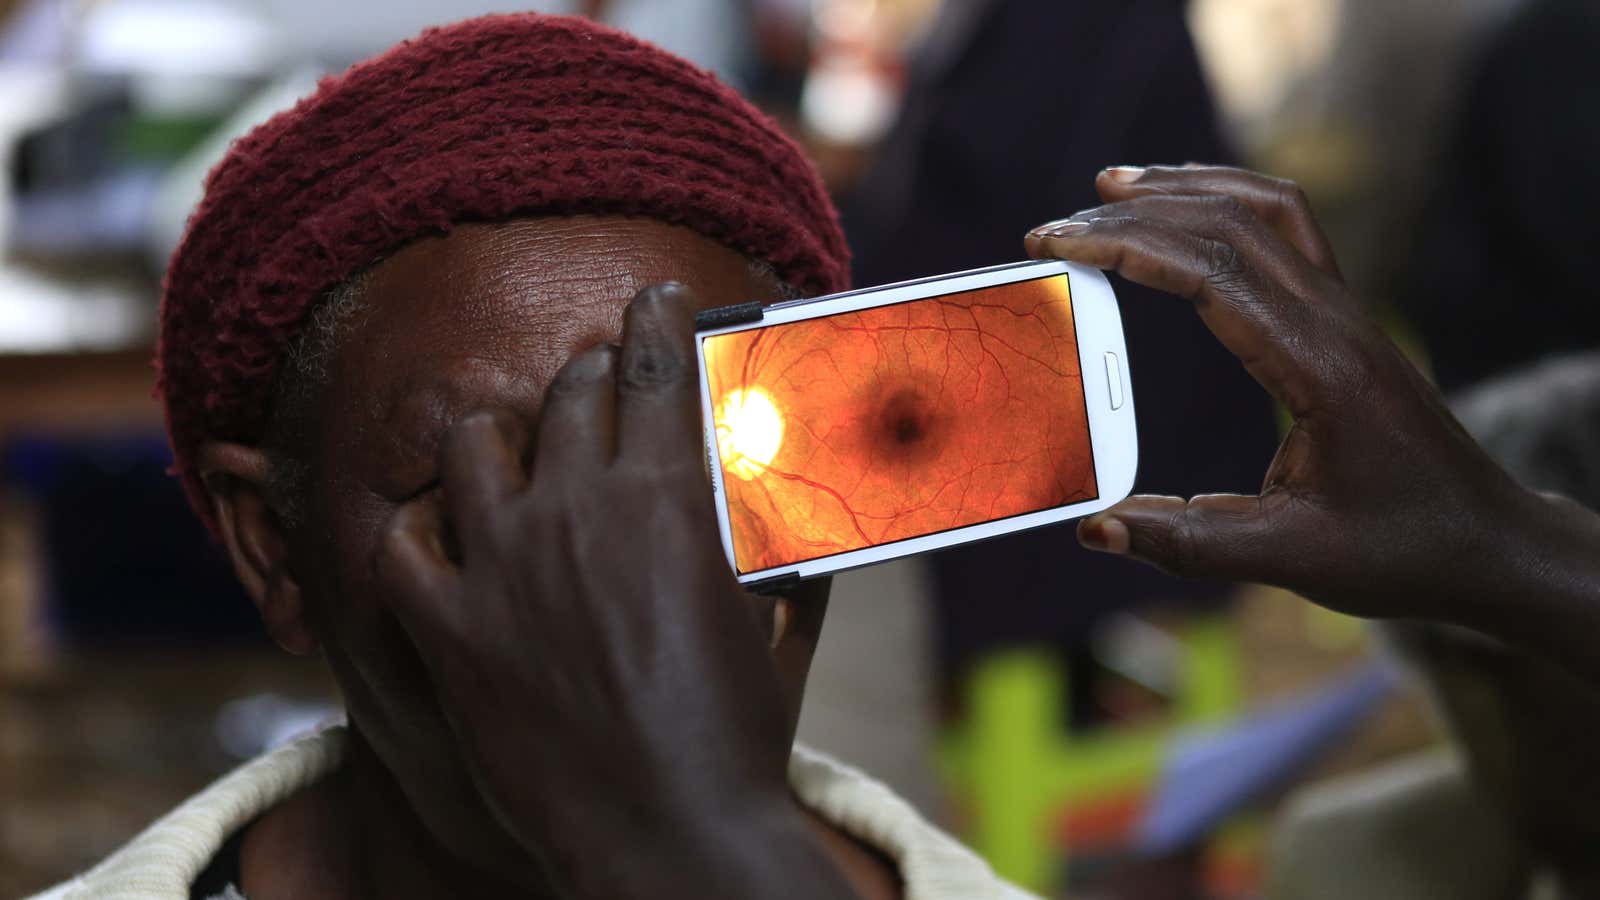 A woman undergoes an eye examination using of a smartphone at a clinic in Kenya.